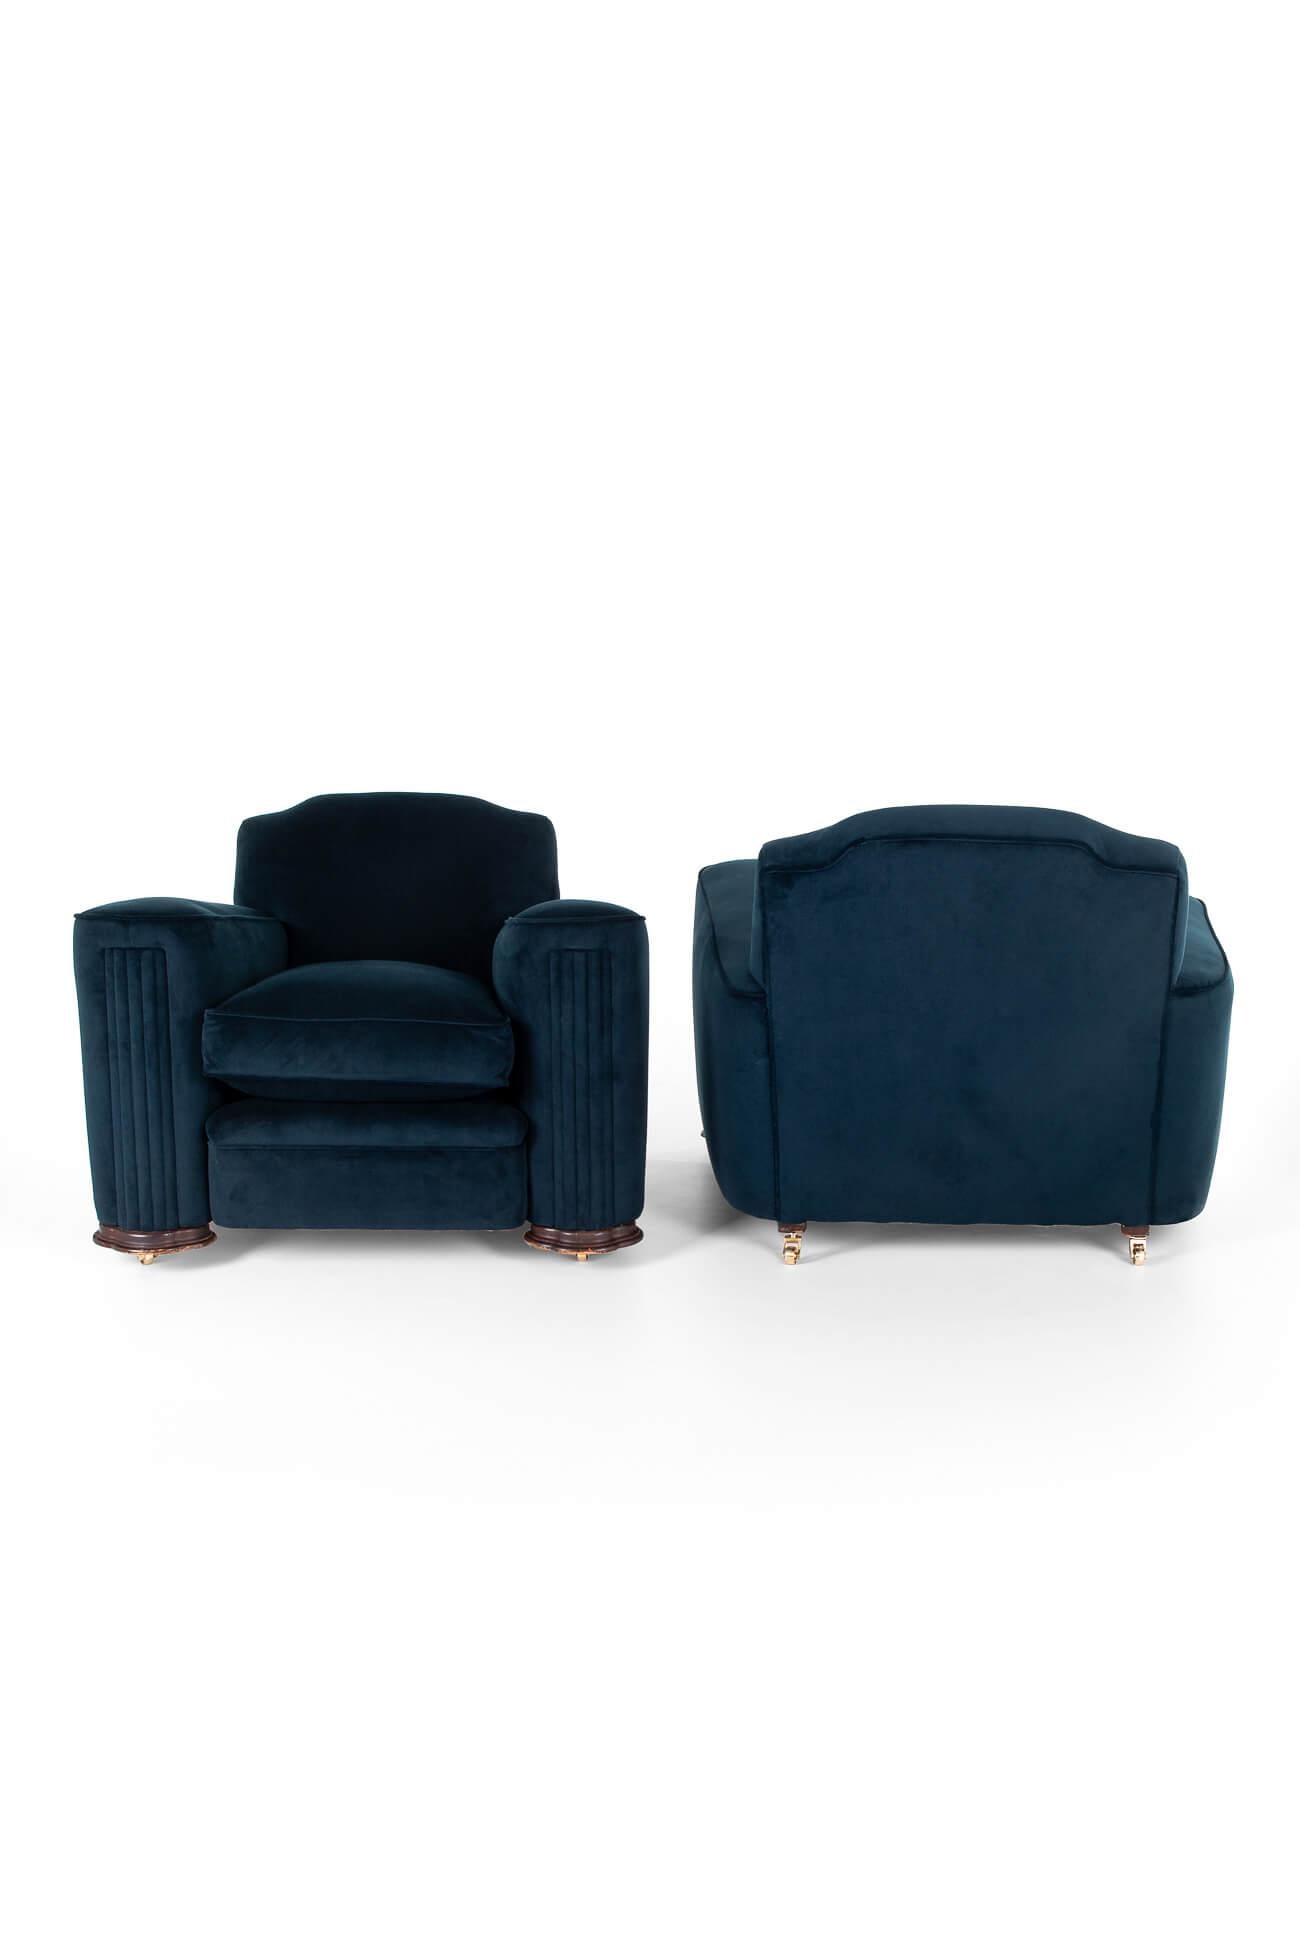 A commanding matching pair of Art Deco lounge chairs in a rich navy blue upholstery.

The armchairs have high backs and large shapely column arms with pleated fronts that surround the generous seats. Both chairs are raised on oak feet and finished